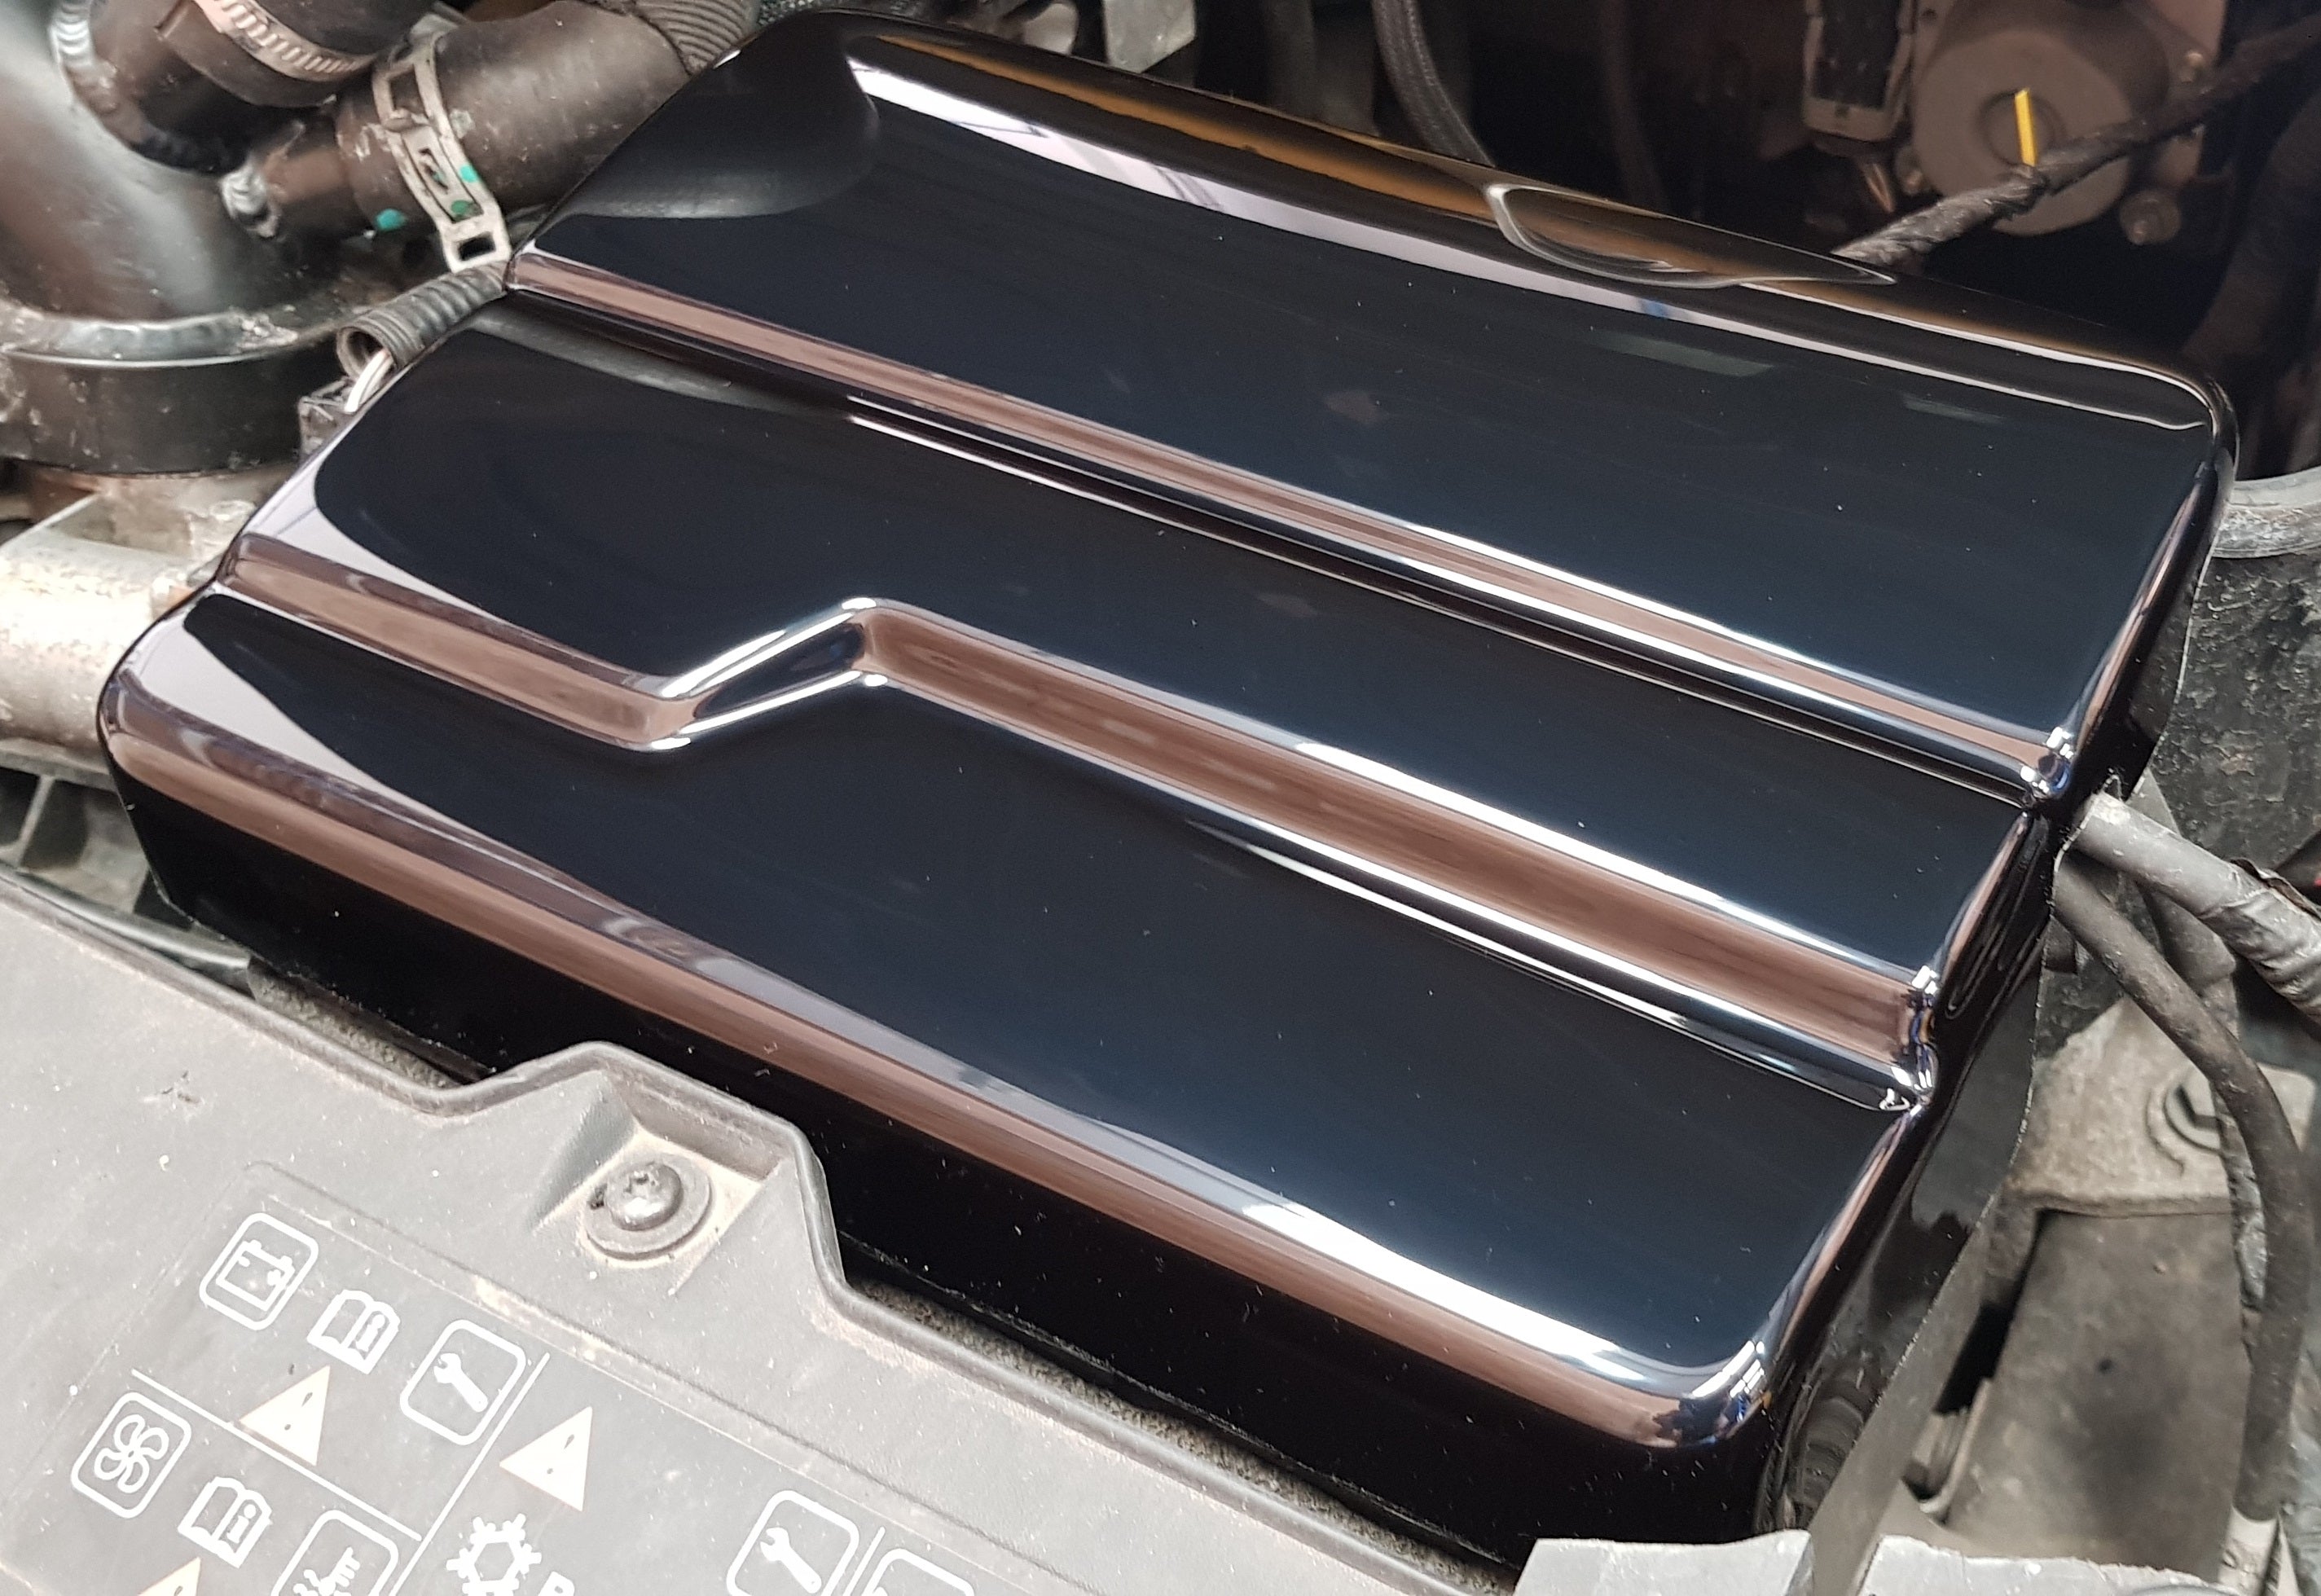 Proform Battery Cover - Mk4 Renault Clio RS (Plastic Finishes)